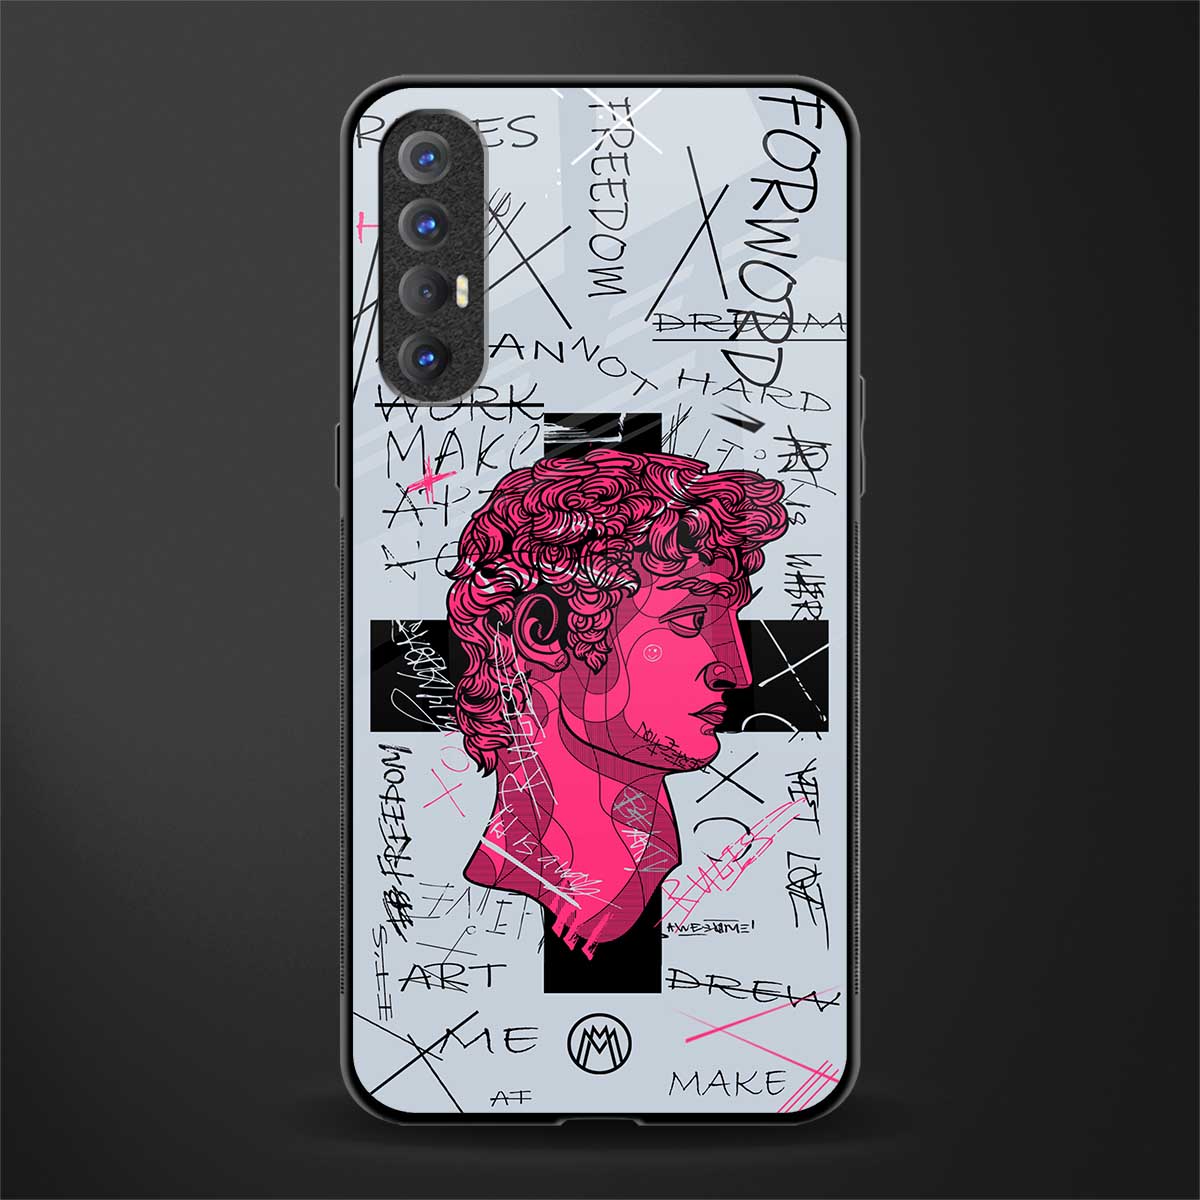 lost in reality david glass case for oppo reno 3 pro image